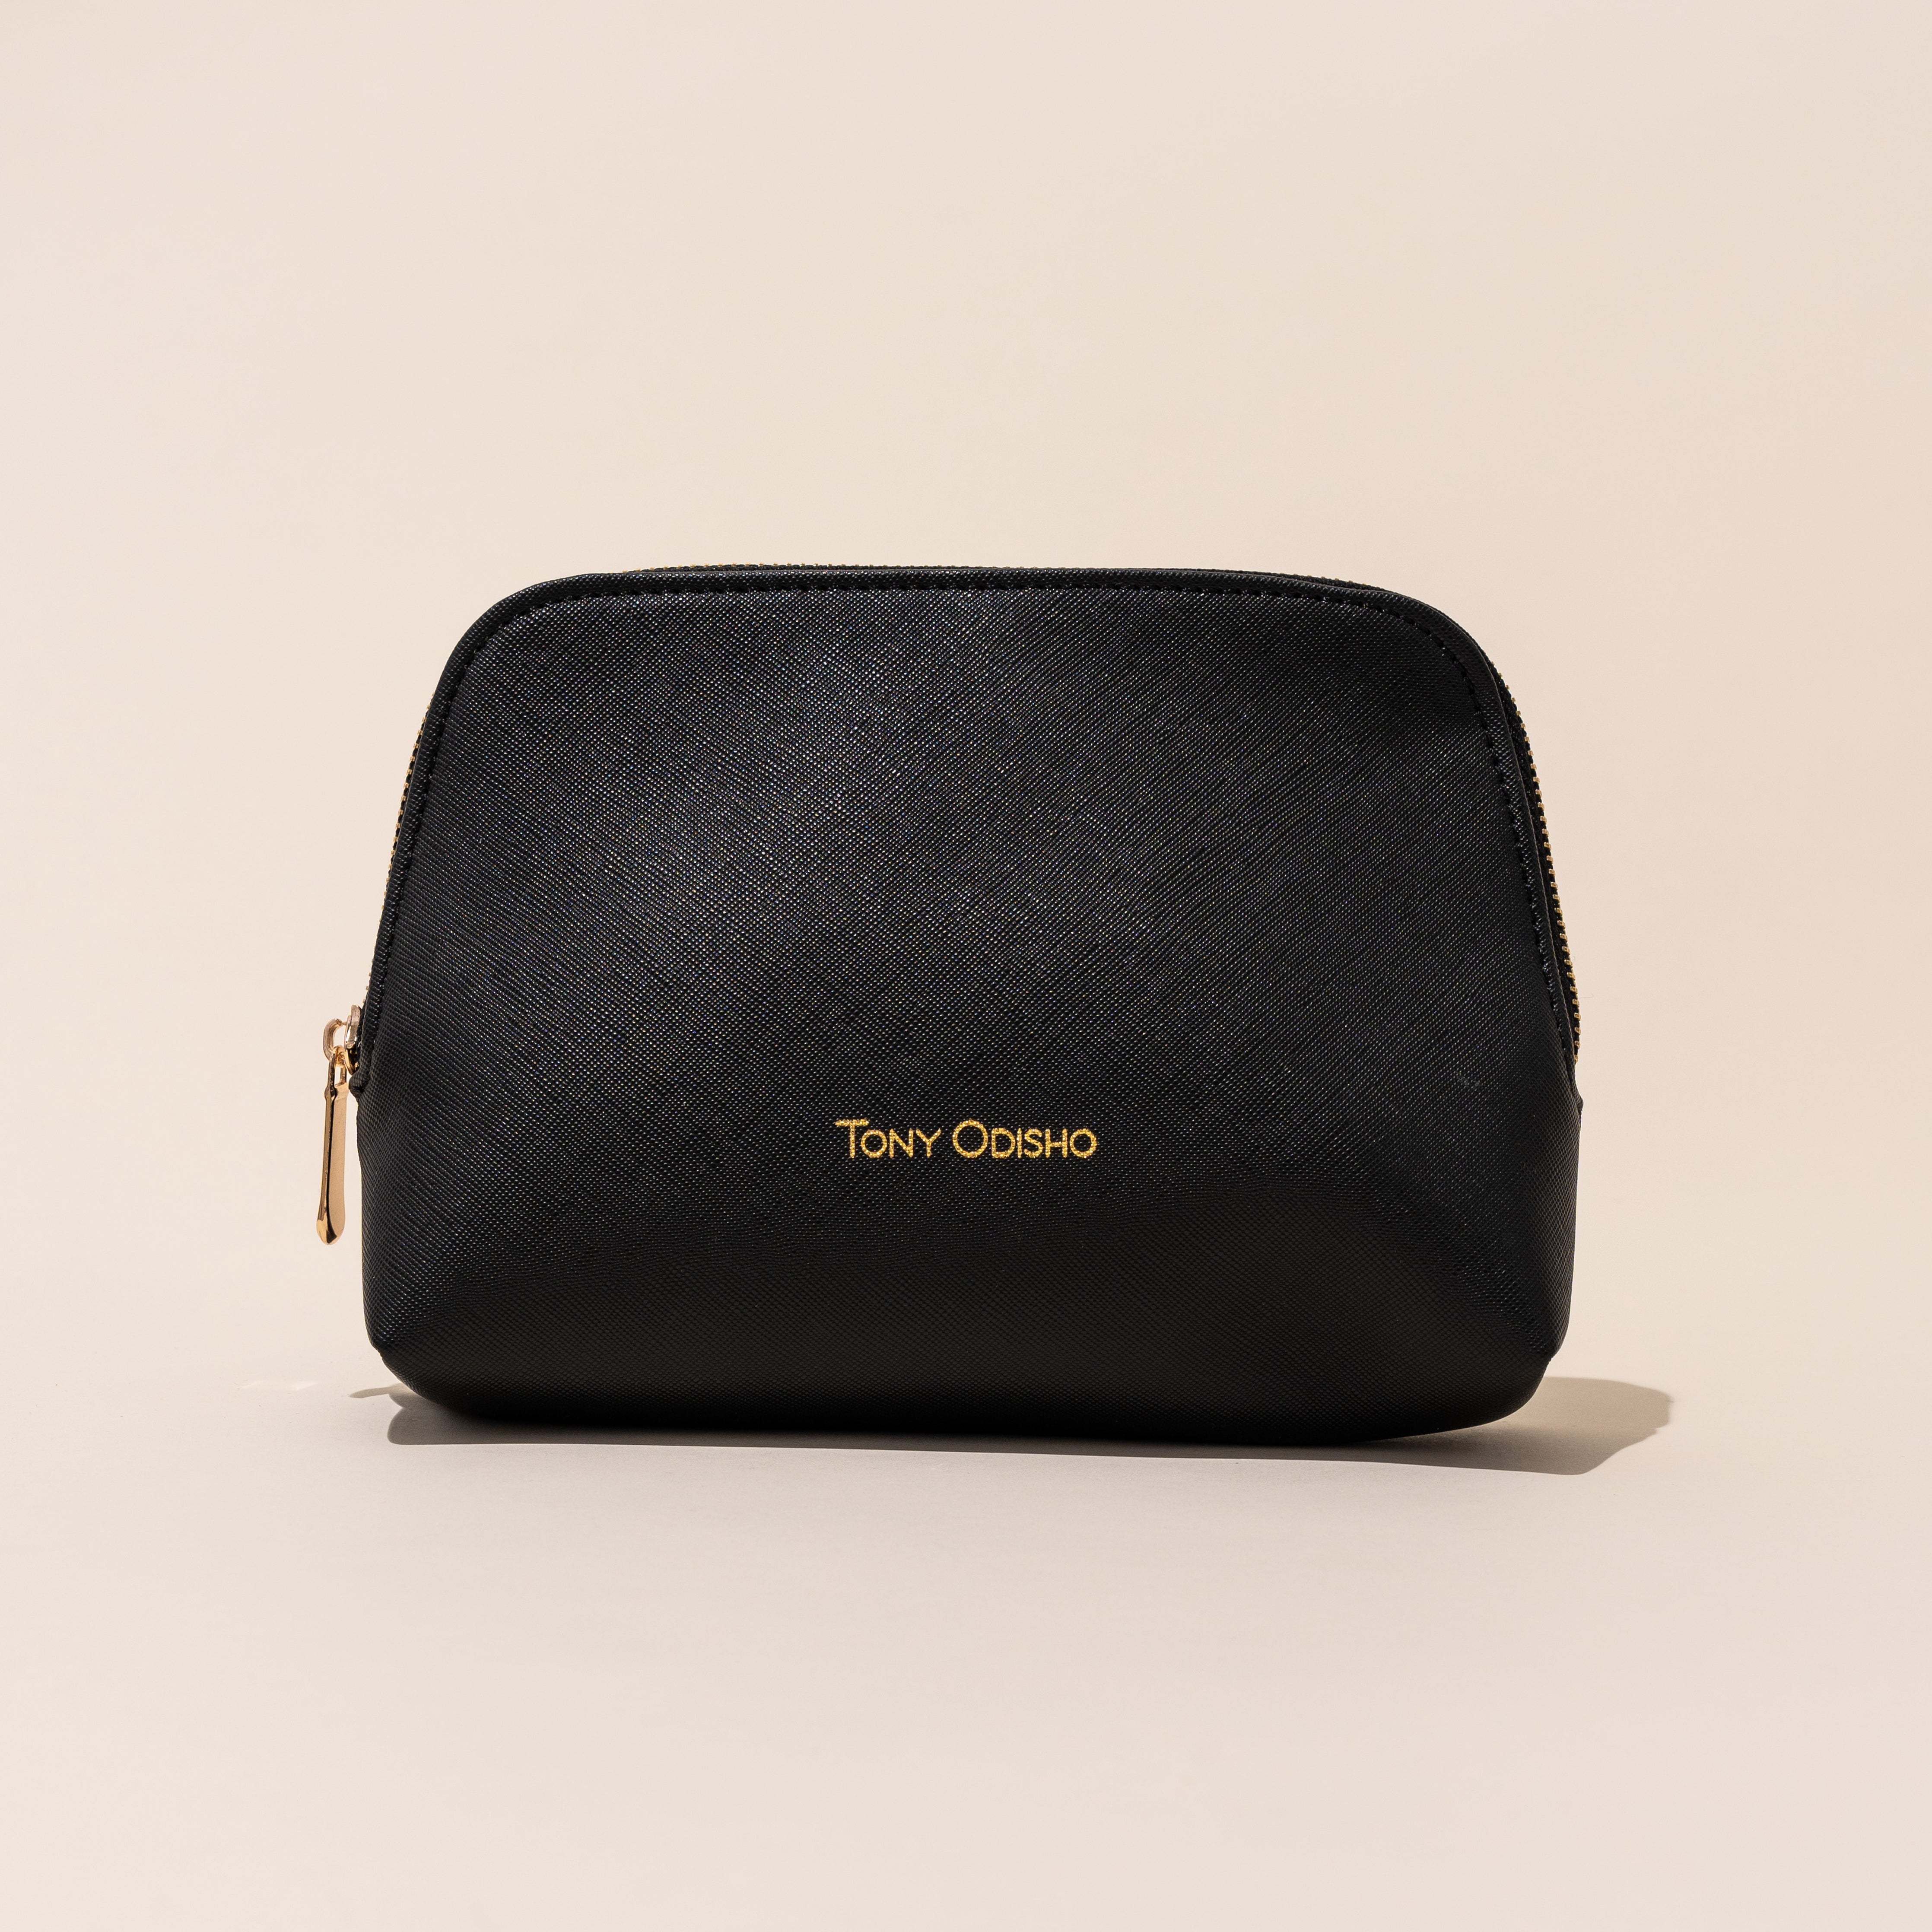 Black Cosmetic Bag | Perfect for Travel and Beauty Essentials